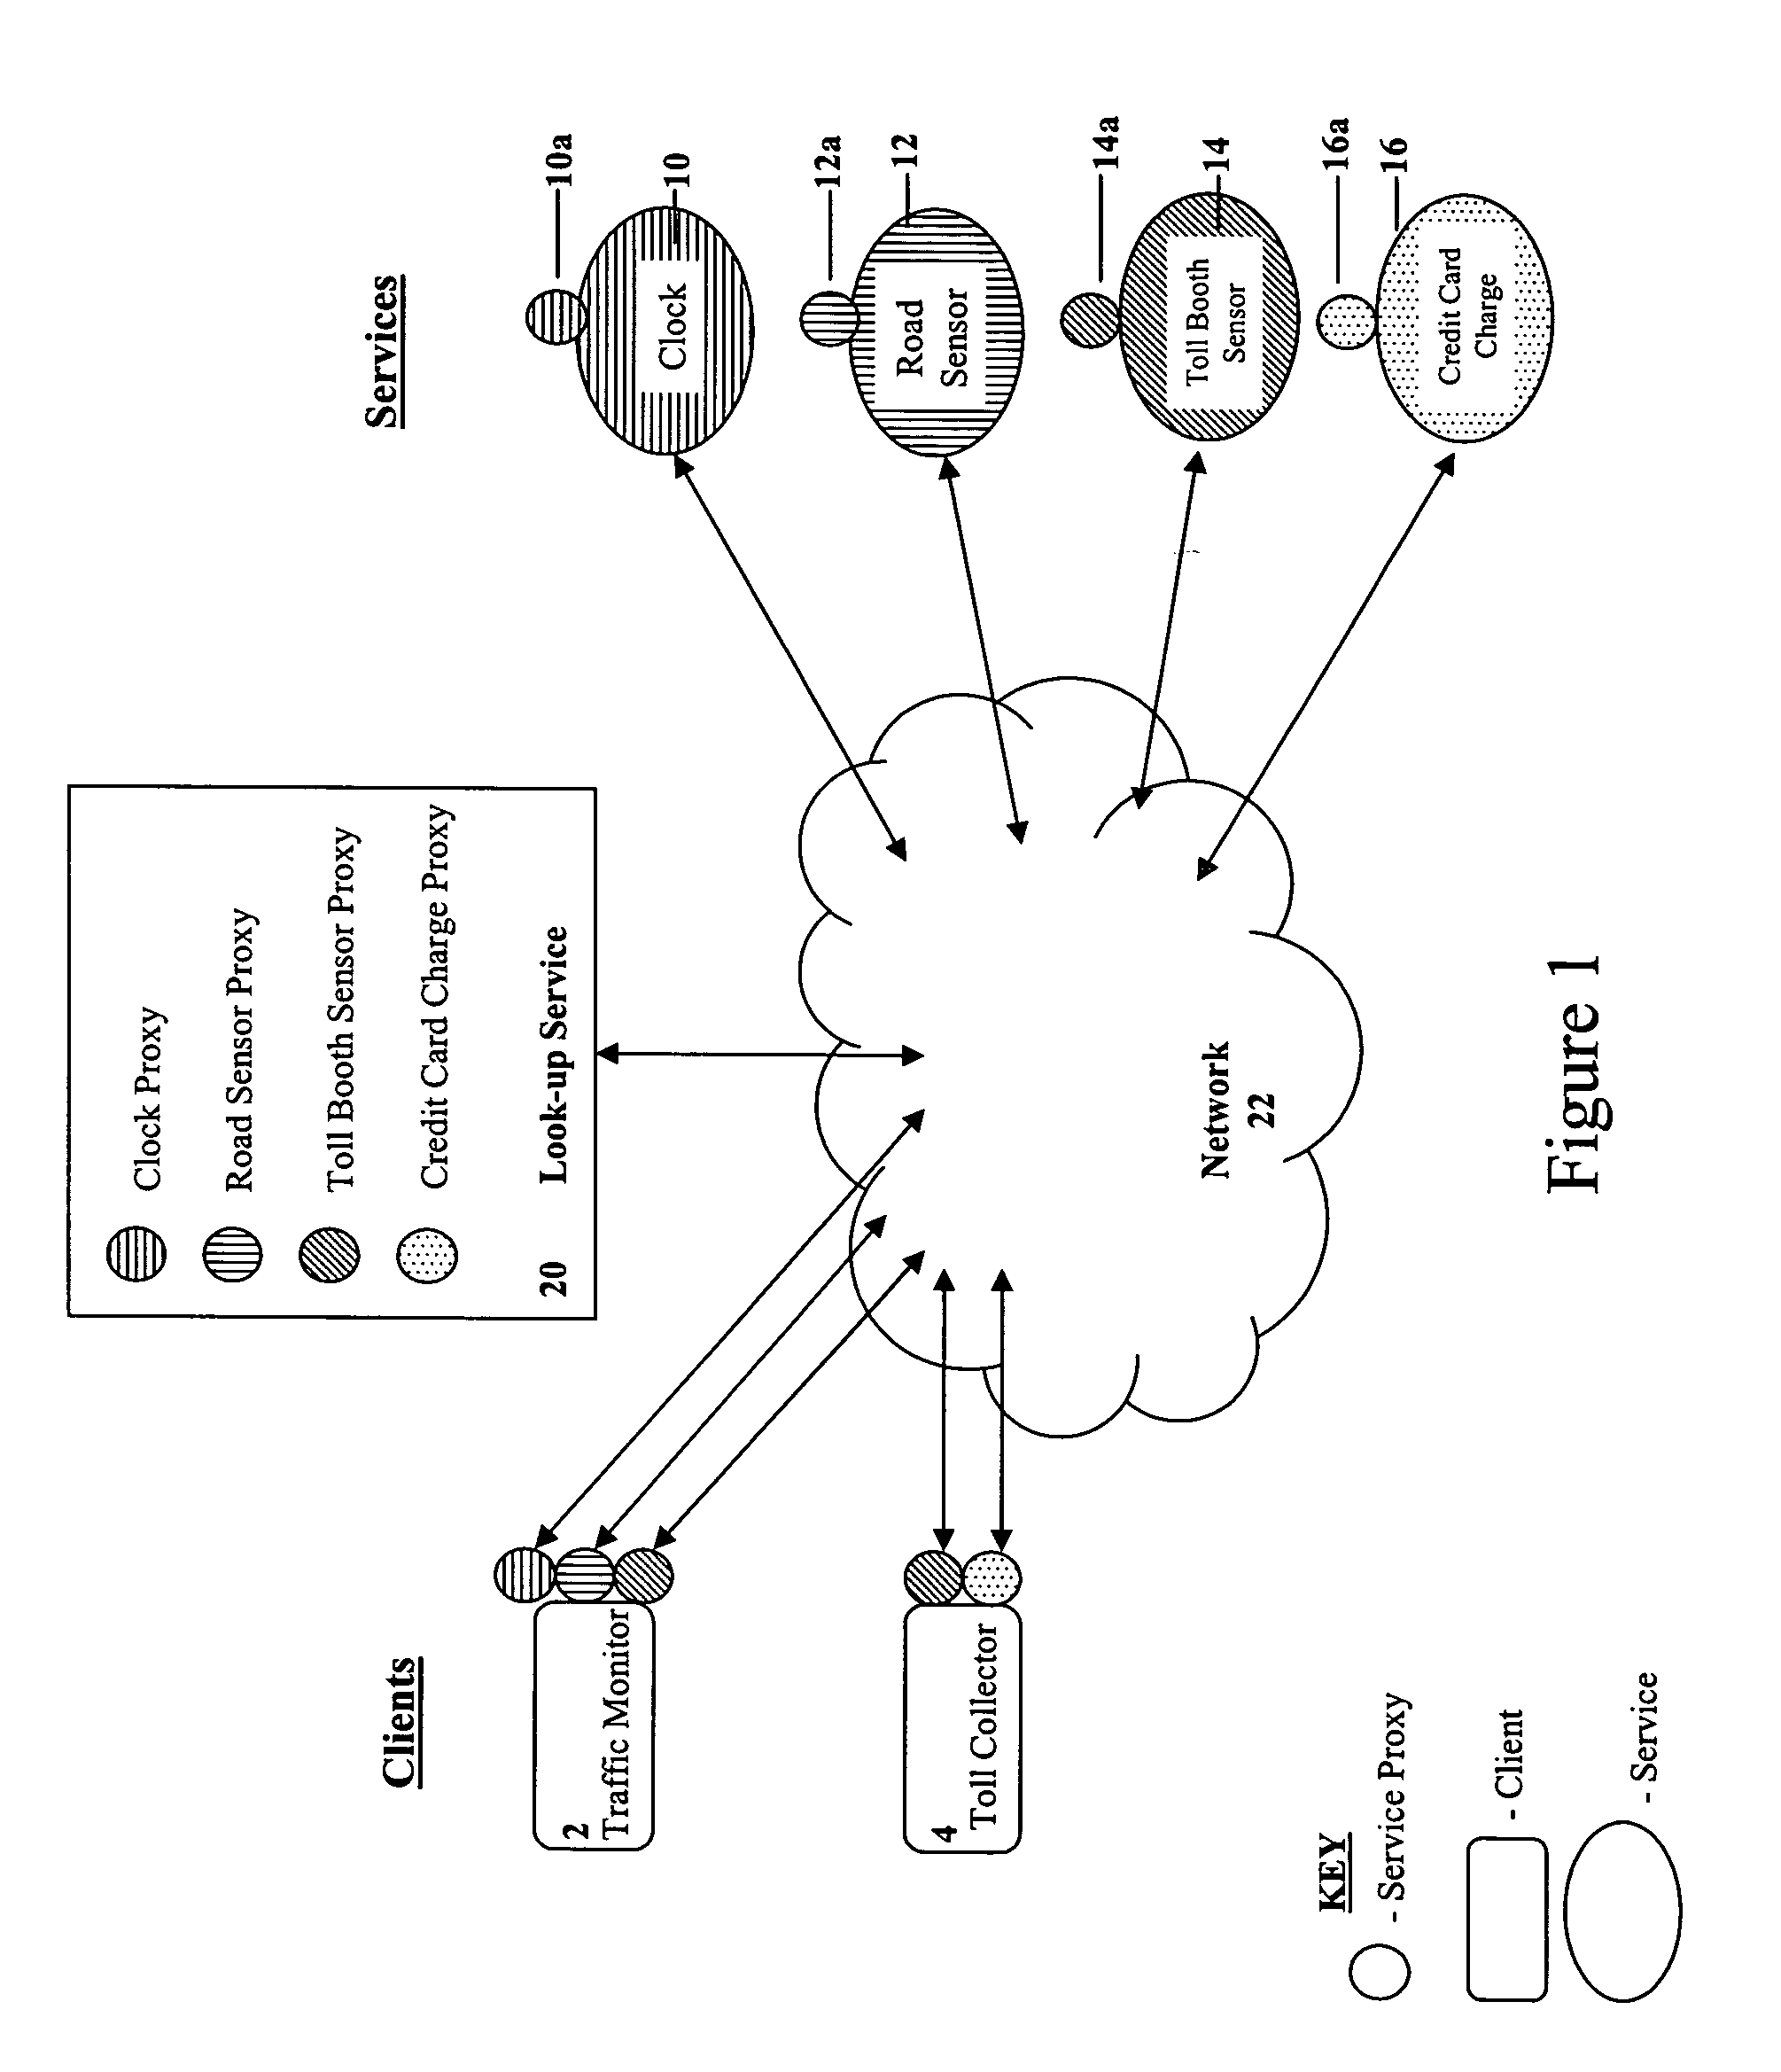 Method for switching group modes in a distributed computing application